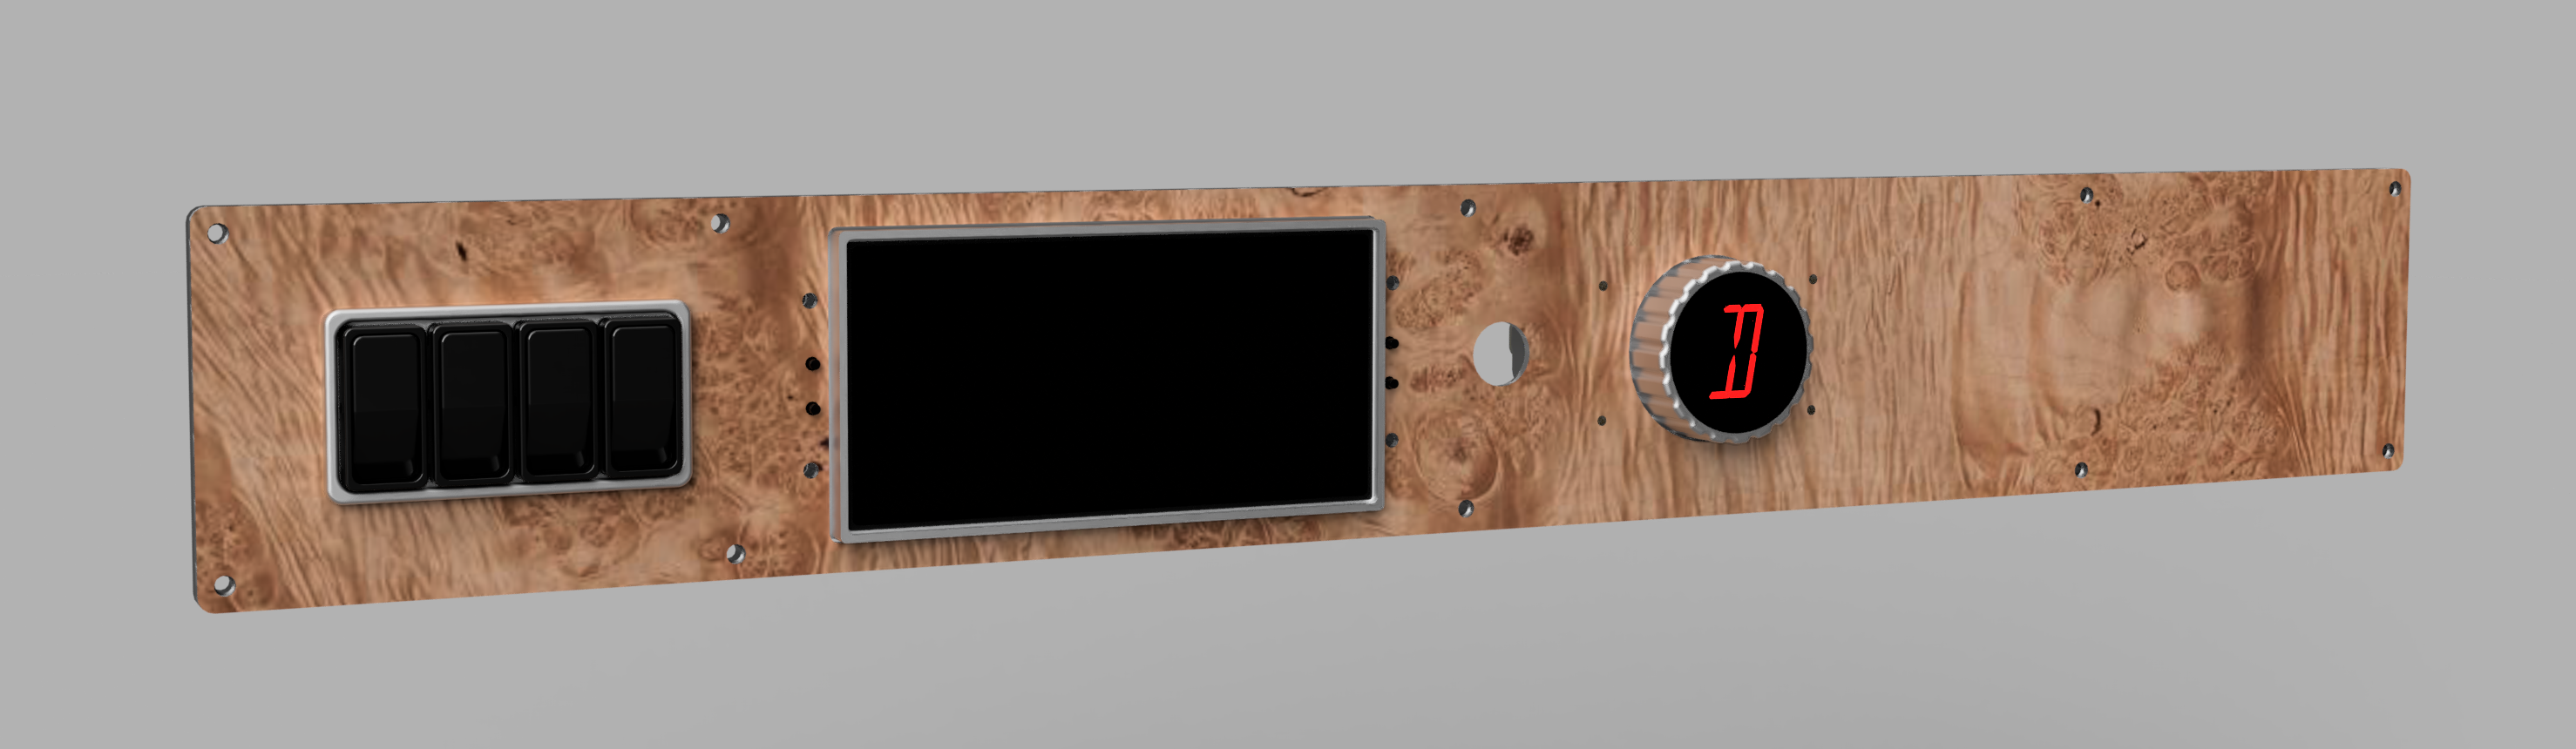 Render of completed dashboard